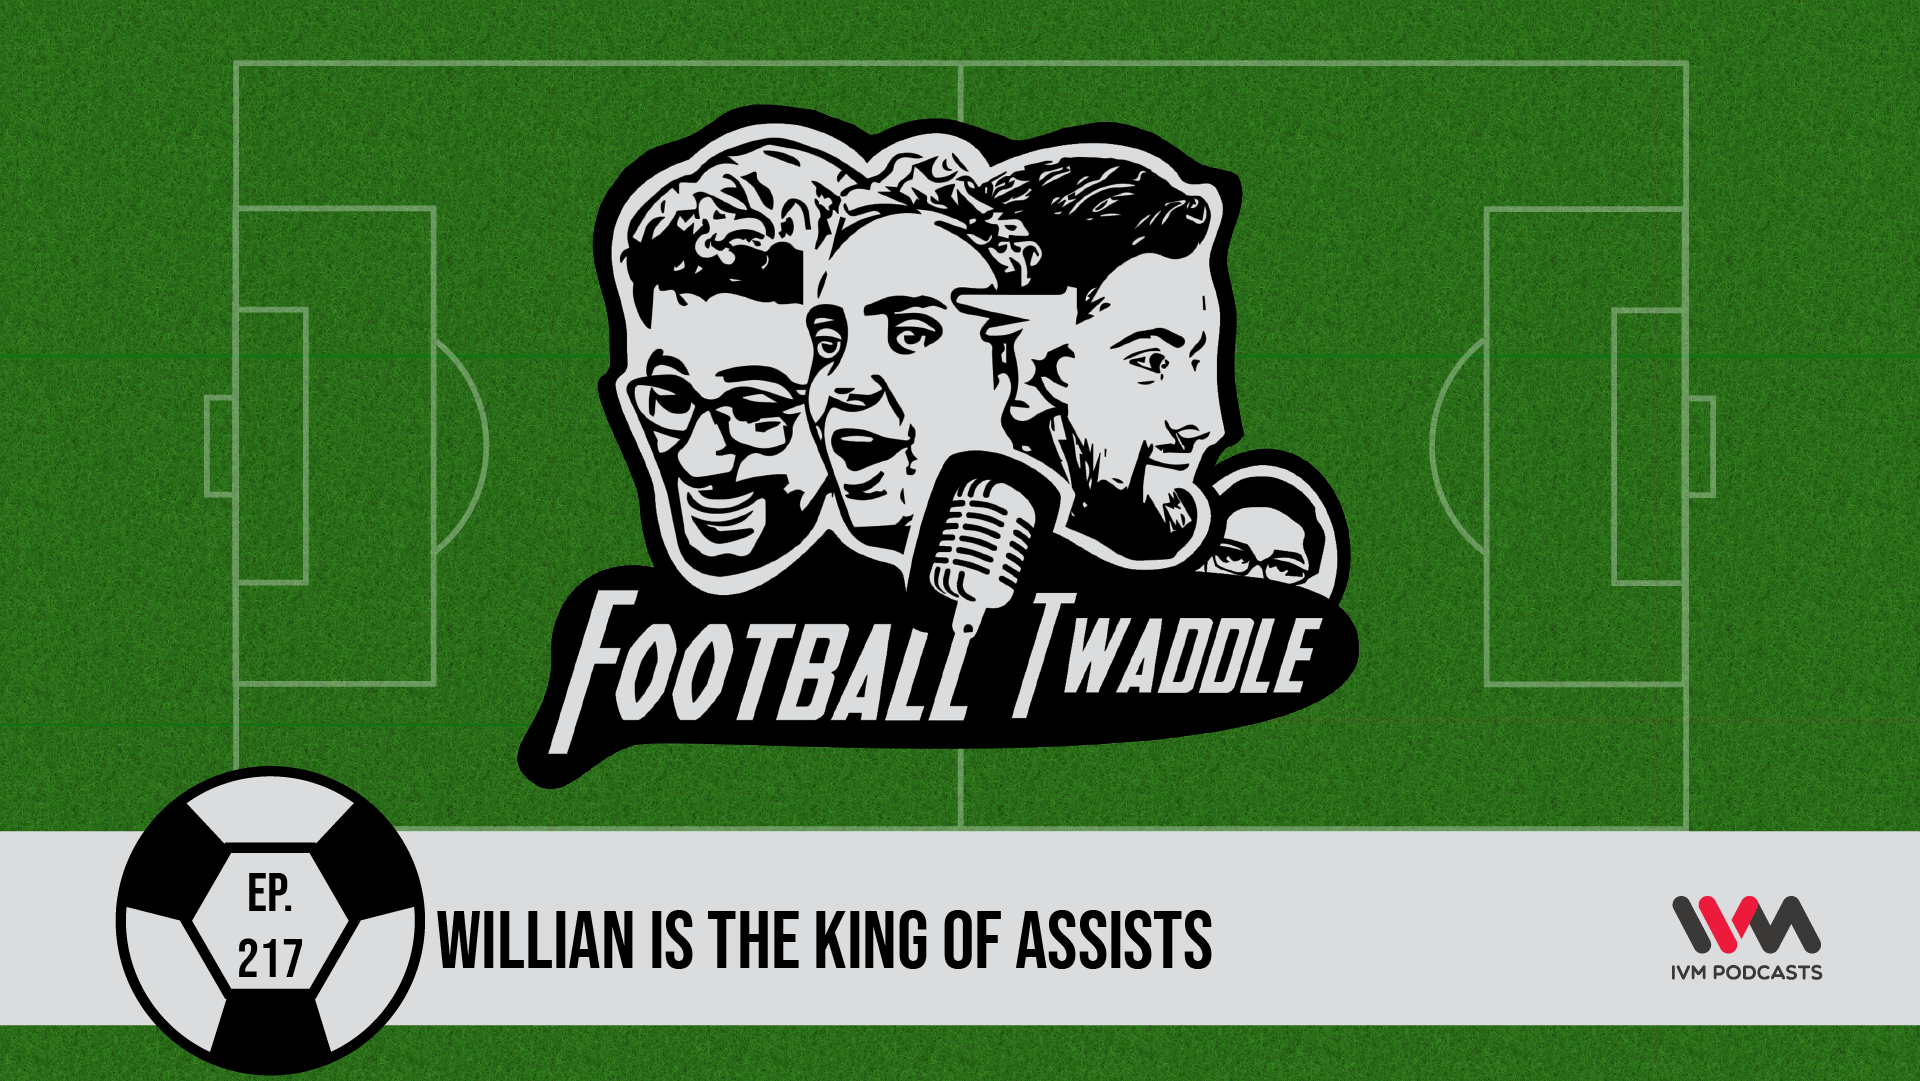 Willian is the King of Assists